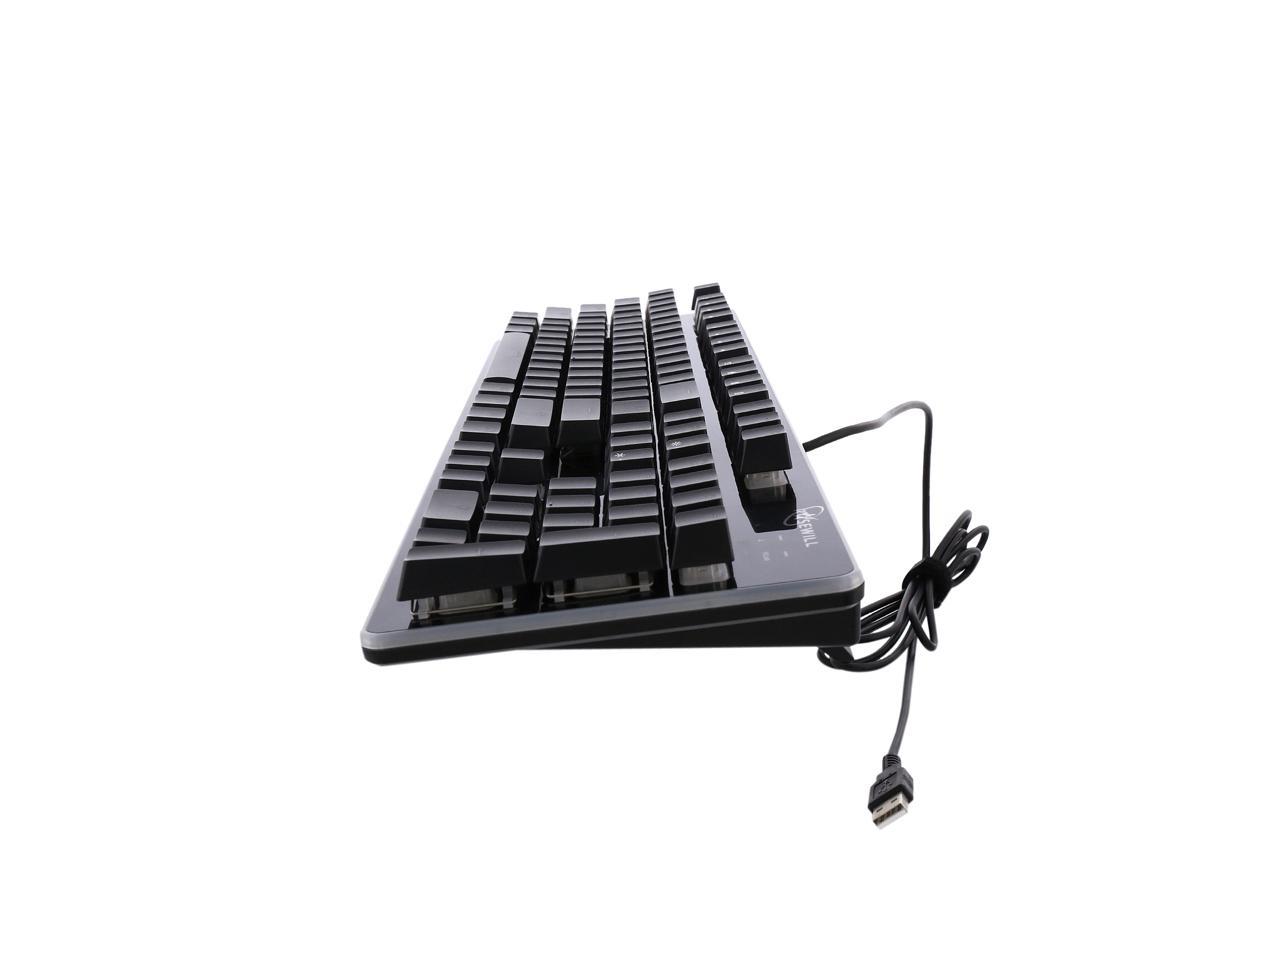 Gaming Keyboard & Mouse Set Big Hand Mobility Keyboard Mouse Set Computer Accessories DR USB Cable Computer Waterproof Keyboard 